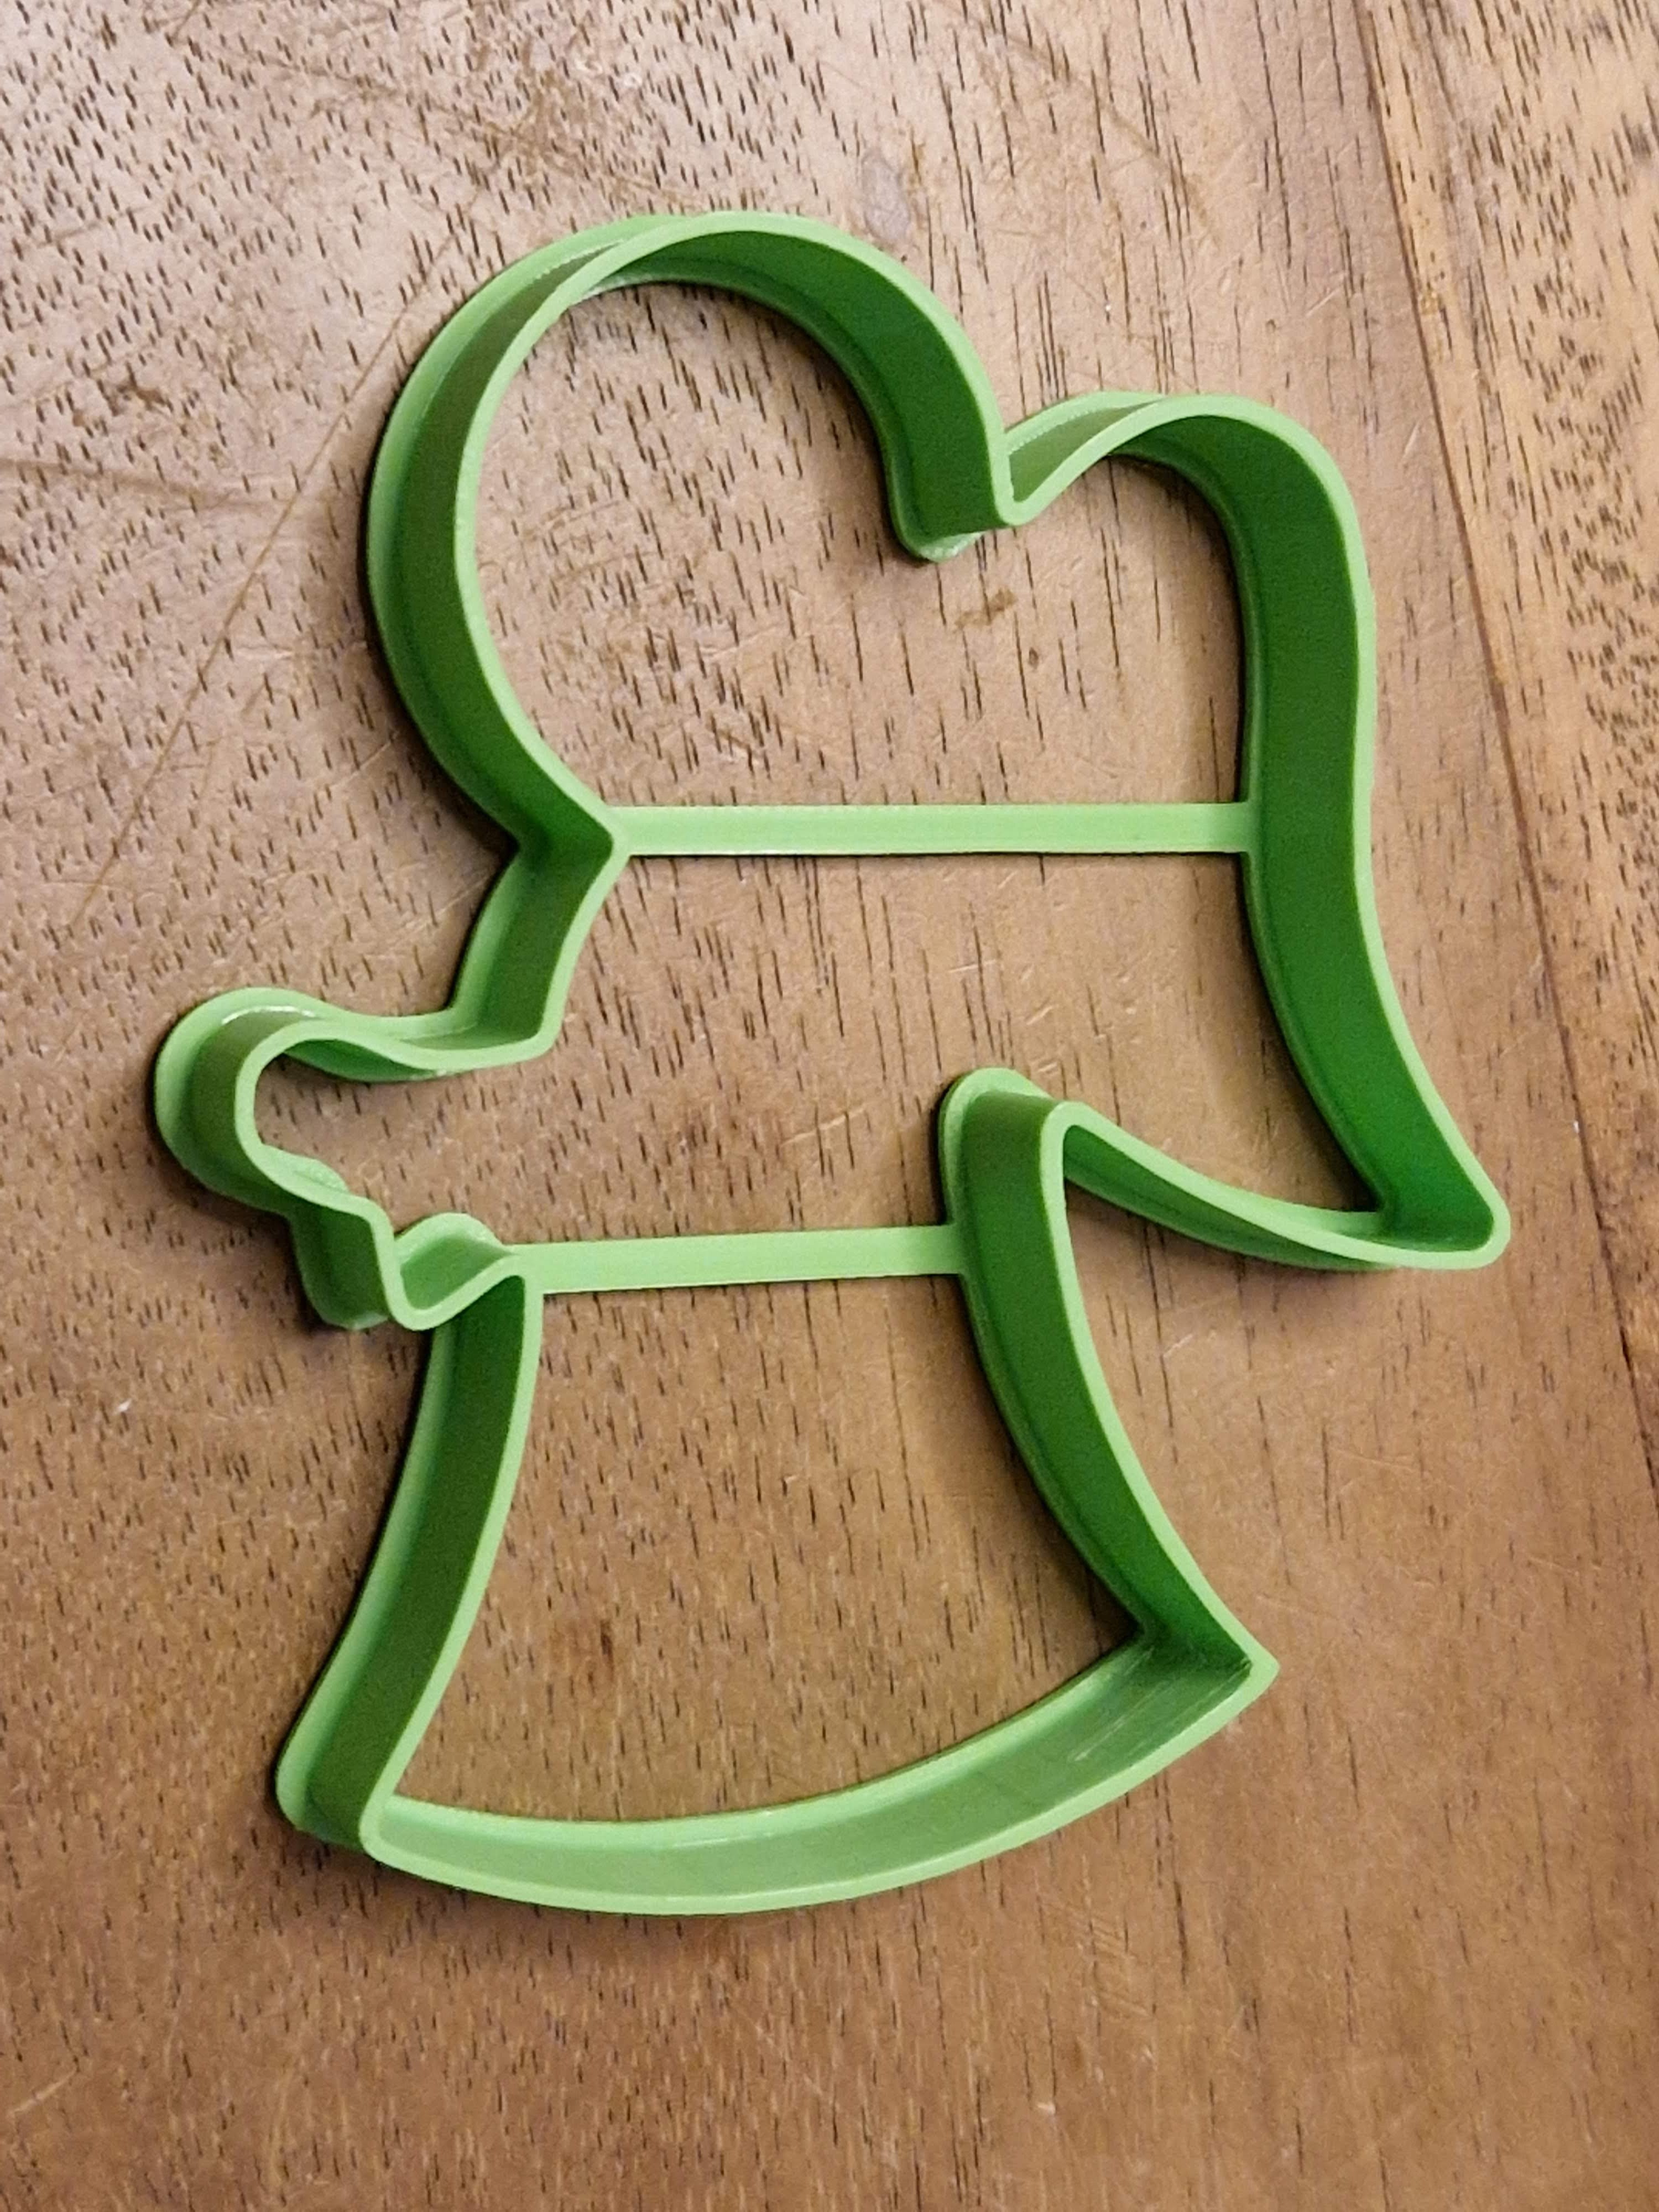 Cookie cutter in the shape of an angel